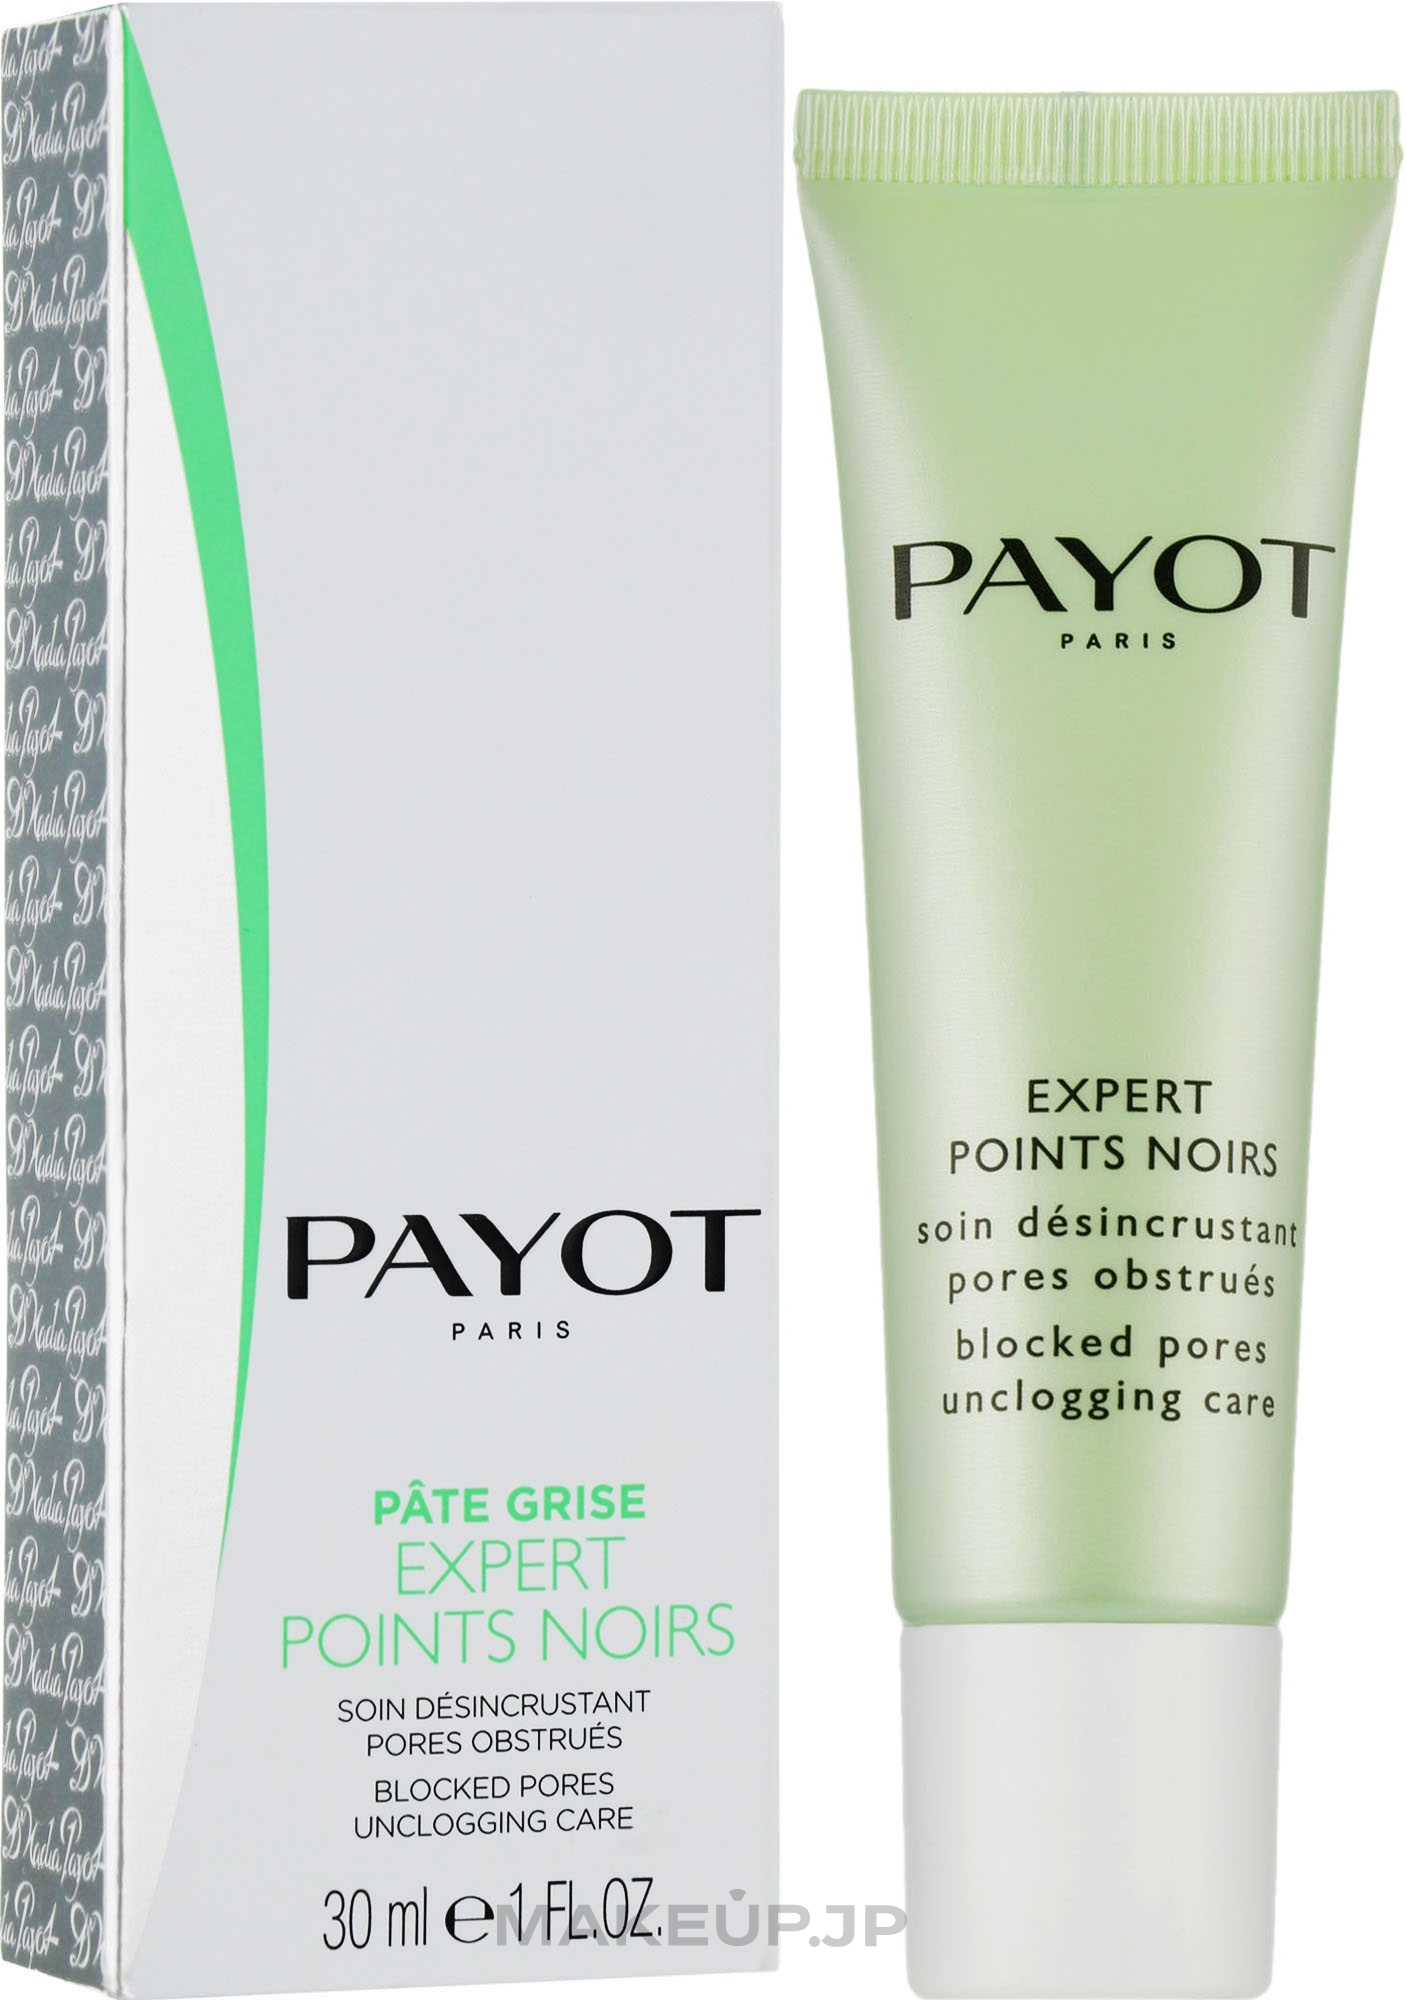 Payot - Pate Grise Blocked Pores Unclogging Care — photo 30 ml